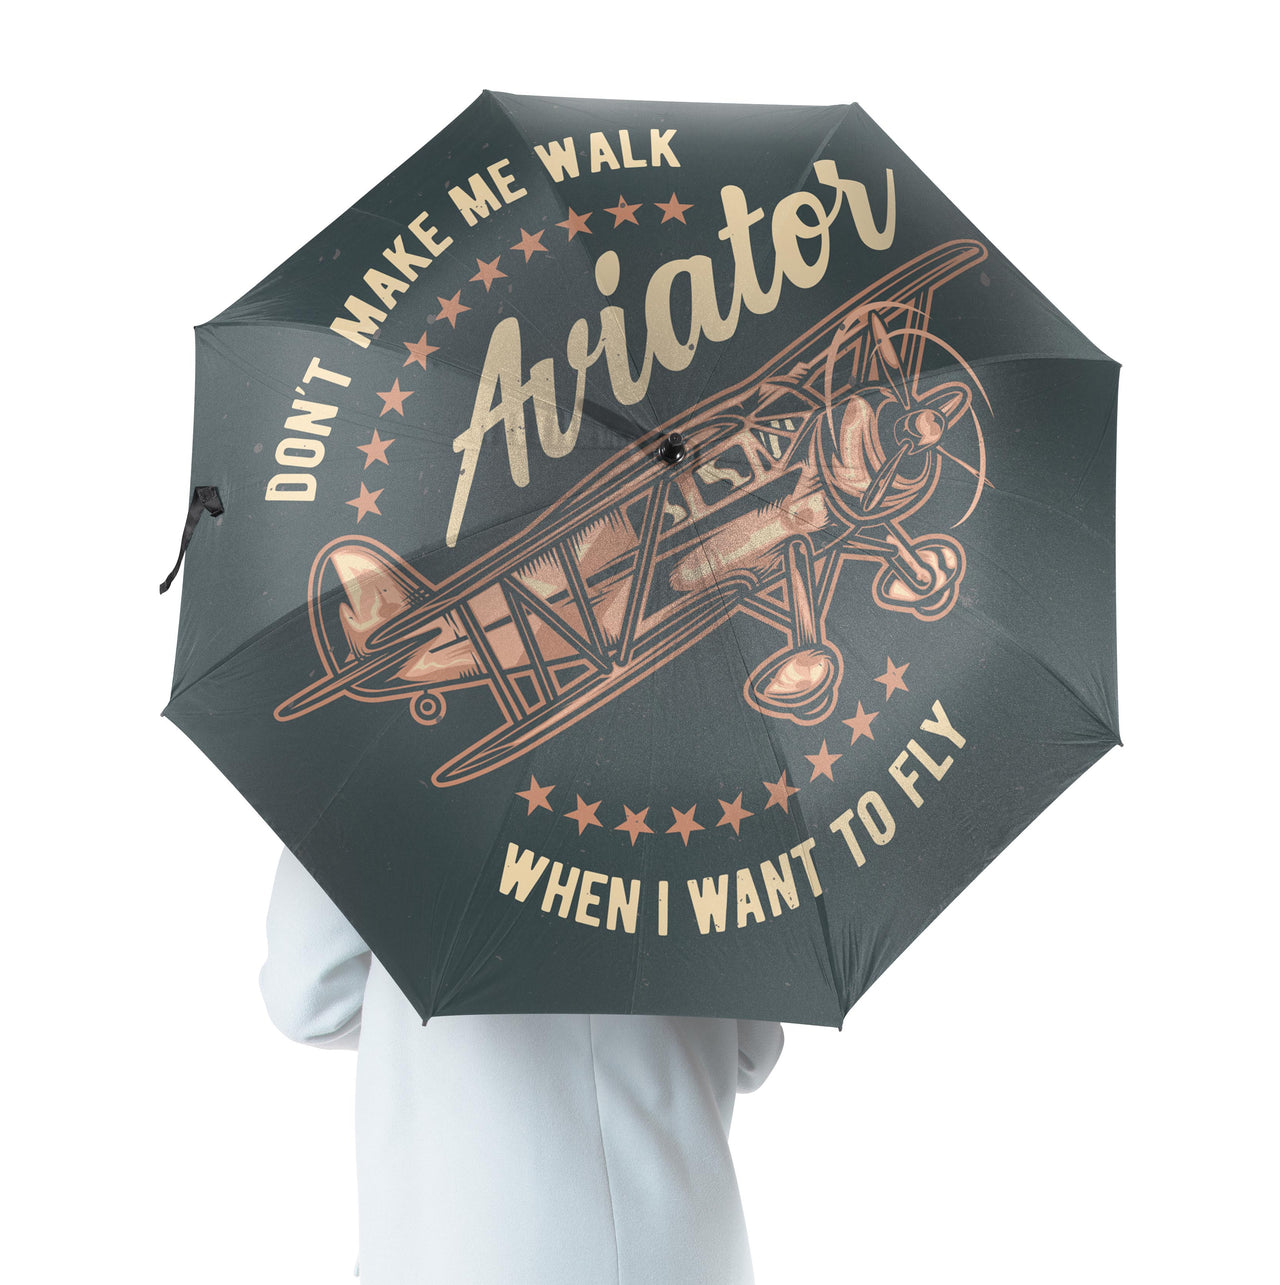 Don't Make me Walk When I want To Fly Designed Umbrella